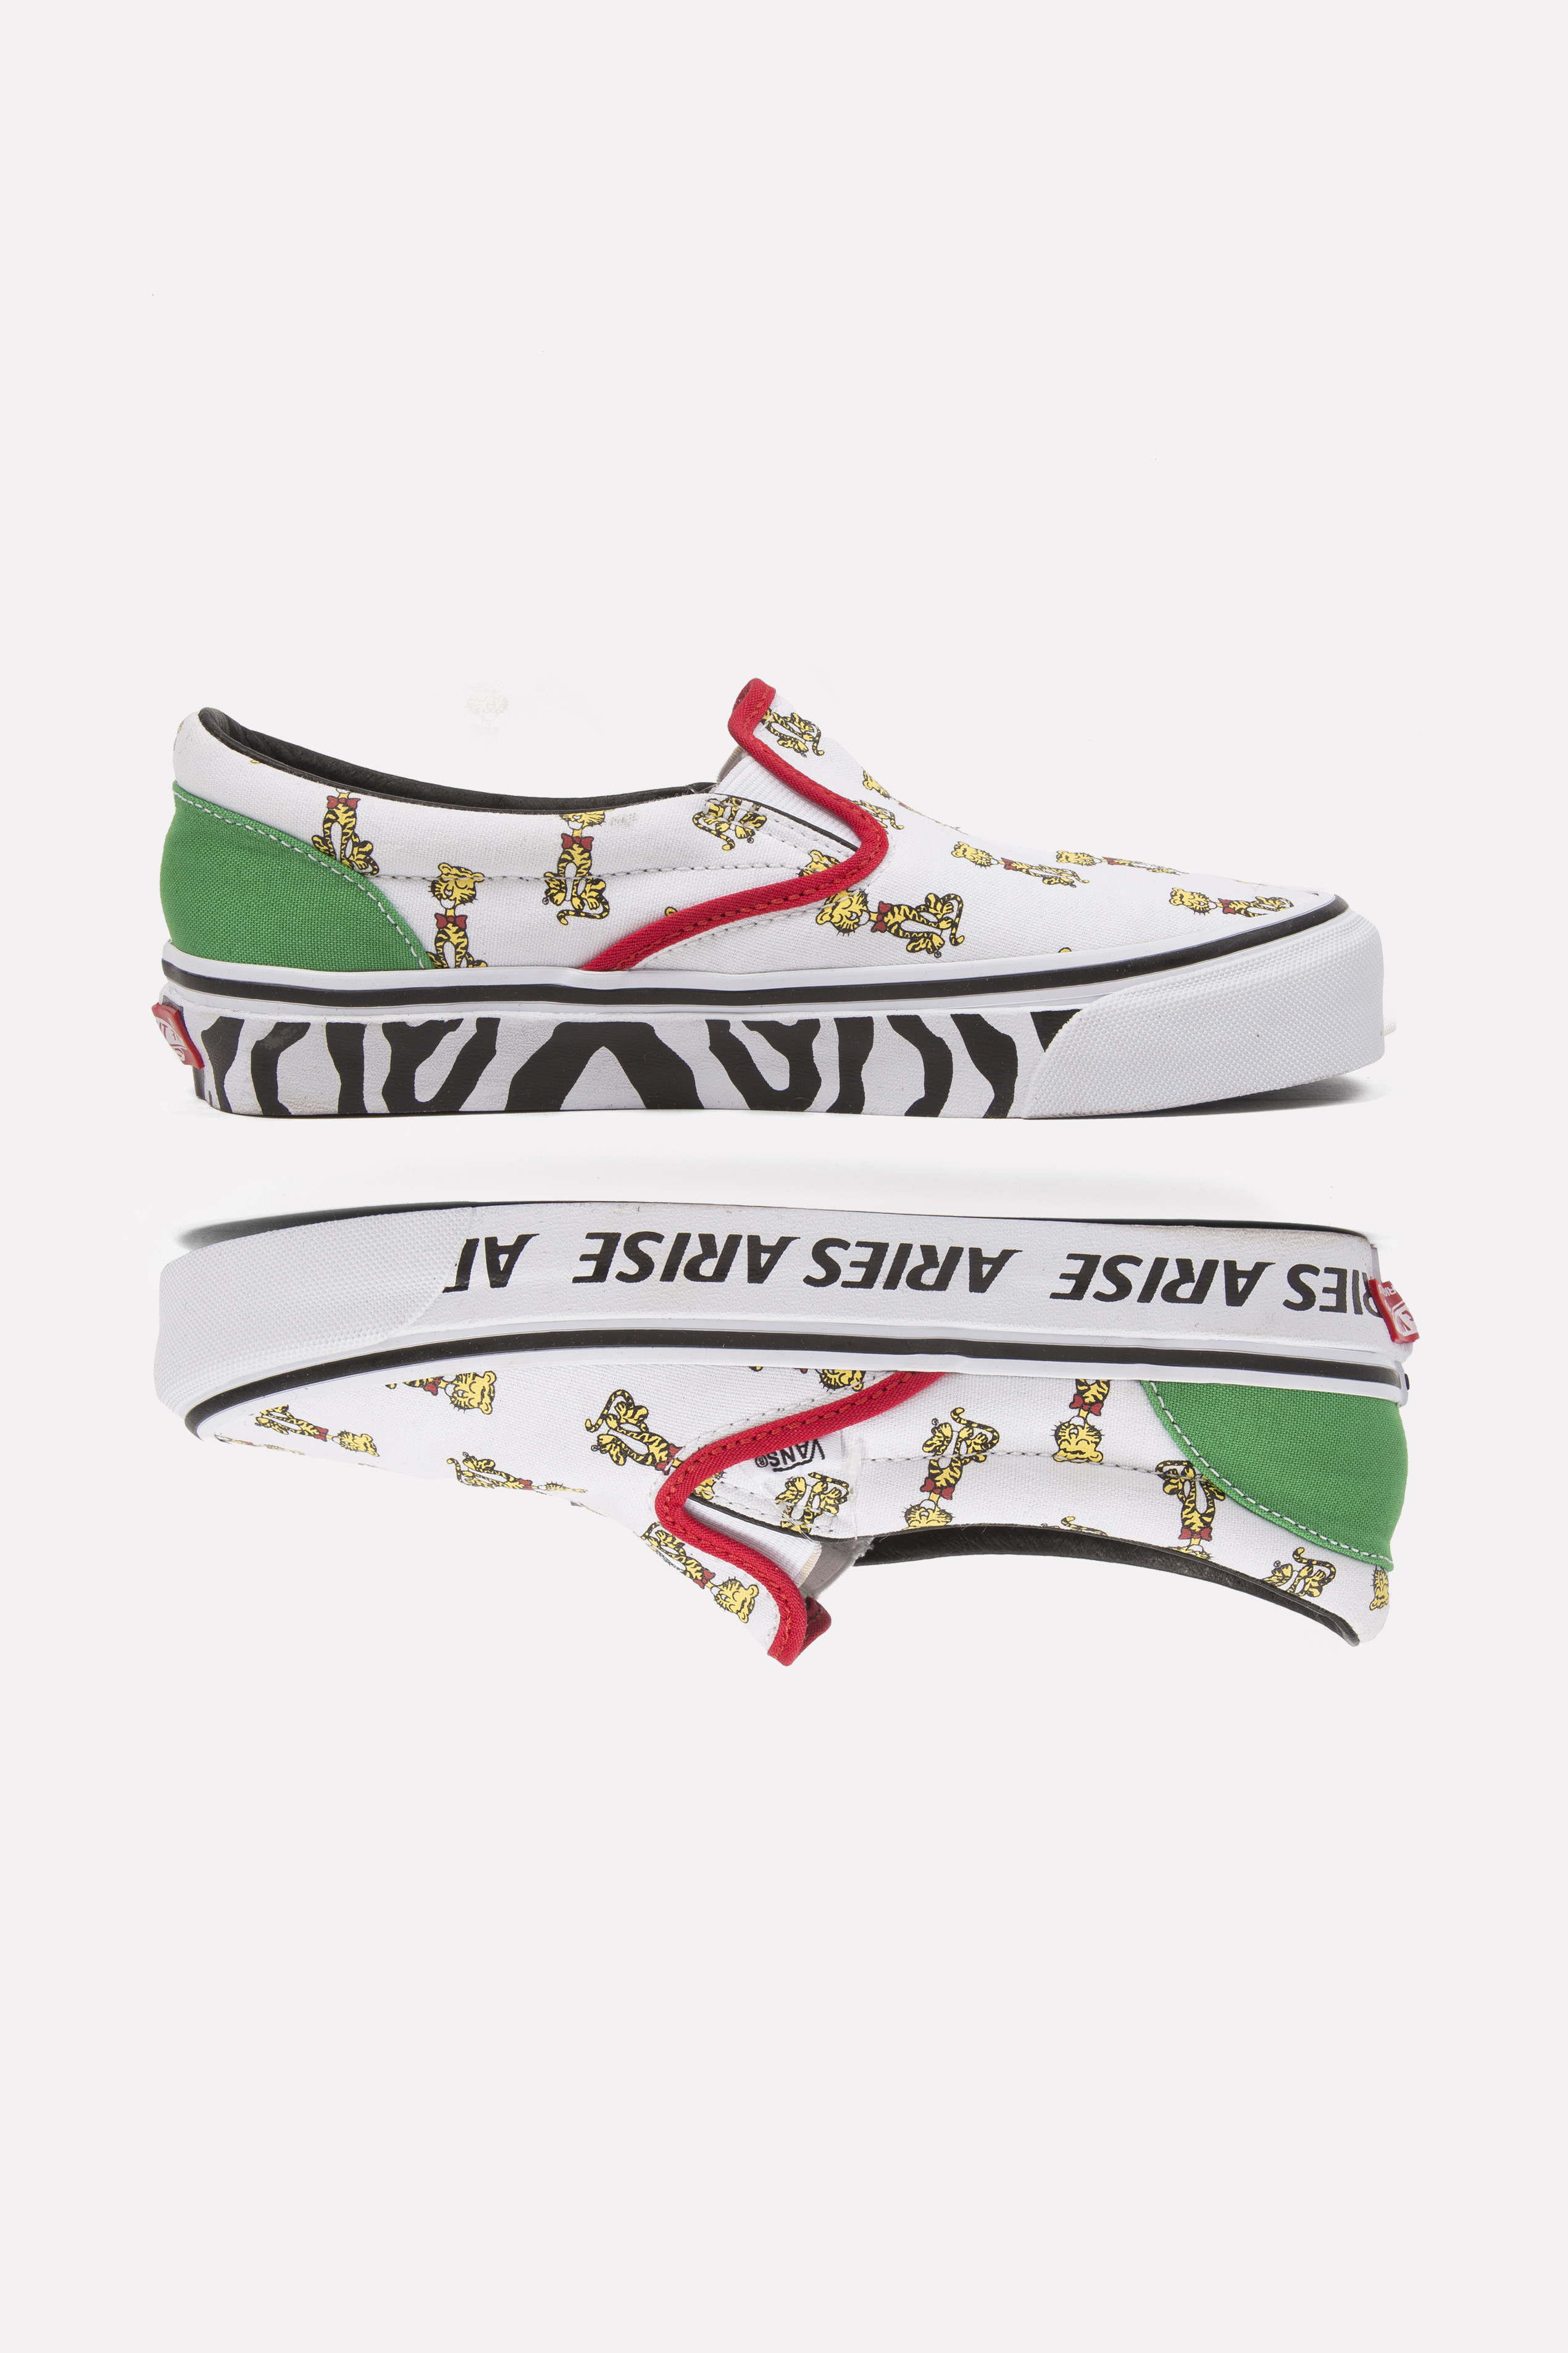 Aries and Vans Vault Collaborate on Iconic Vans Models With Uplifted Designs